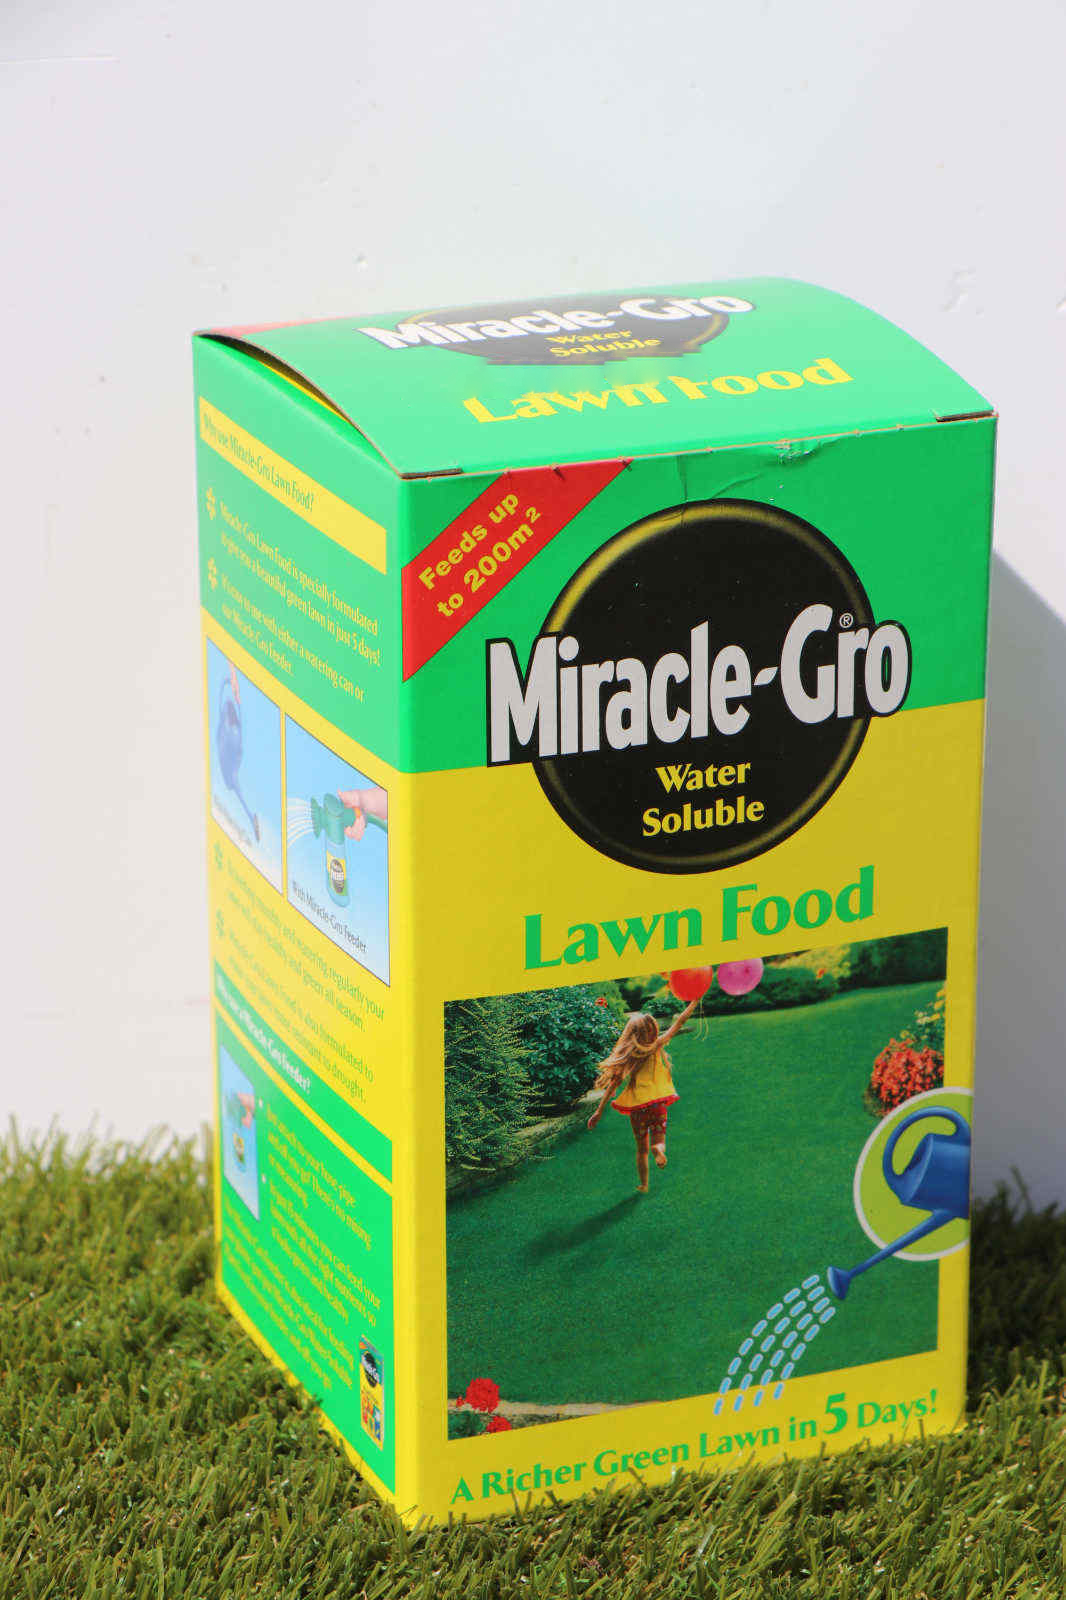 Image of Miracle-Gro Lawn Food for Shade free to use image